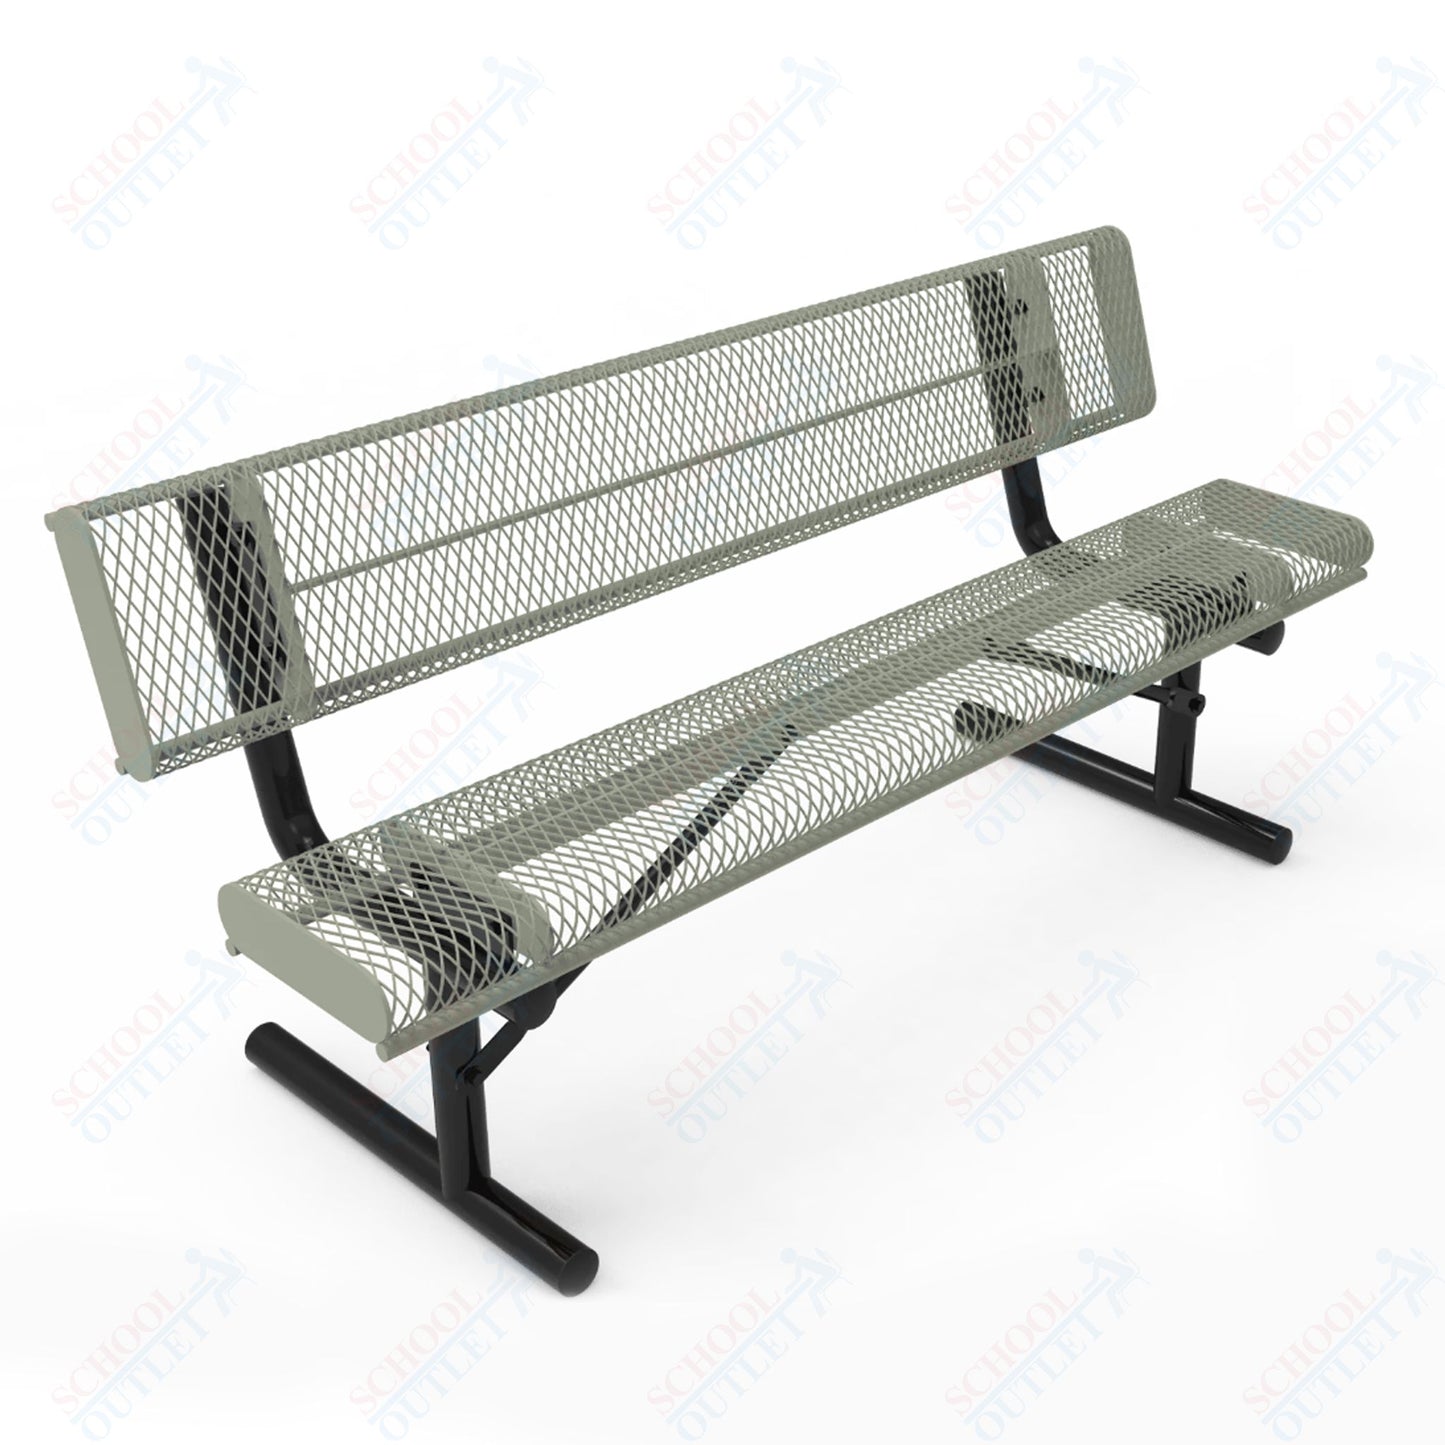 MyTcoat - Rolled Edges Outdoor Portable Bench with Back 6' L (MYT-BRE06-18)